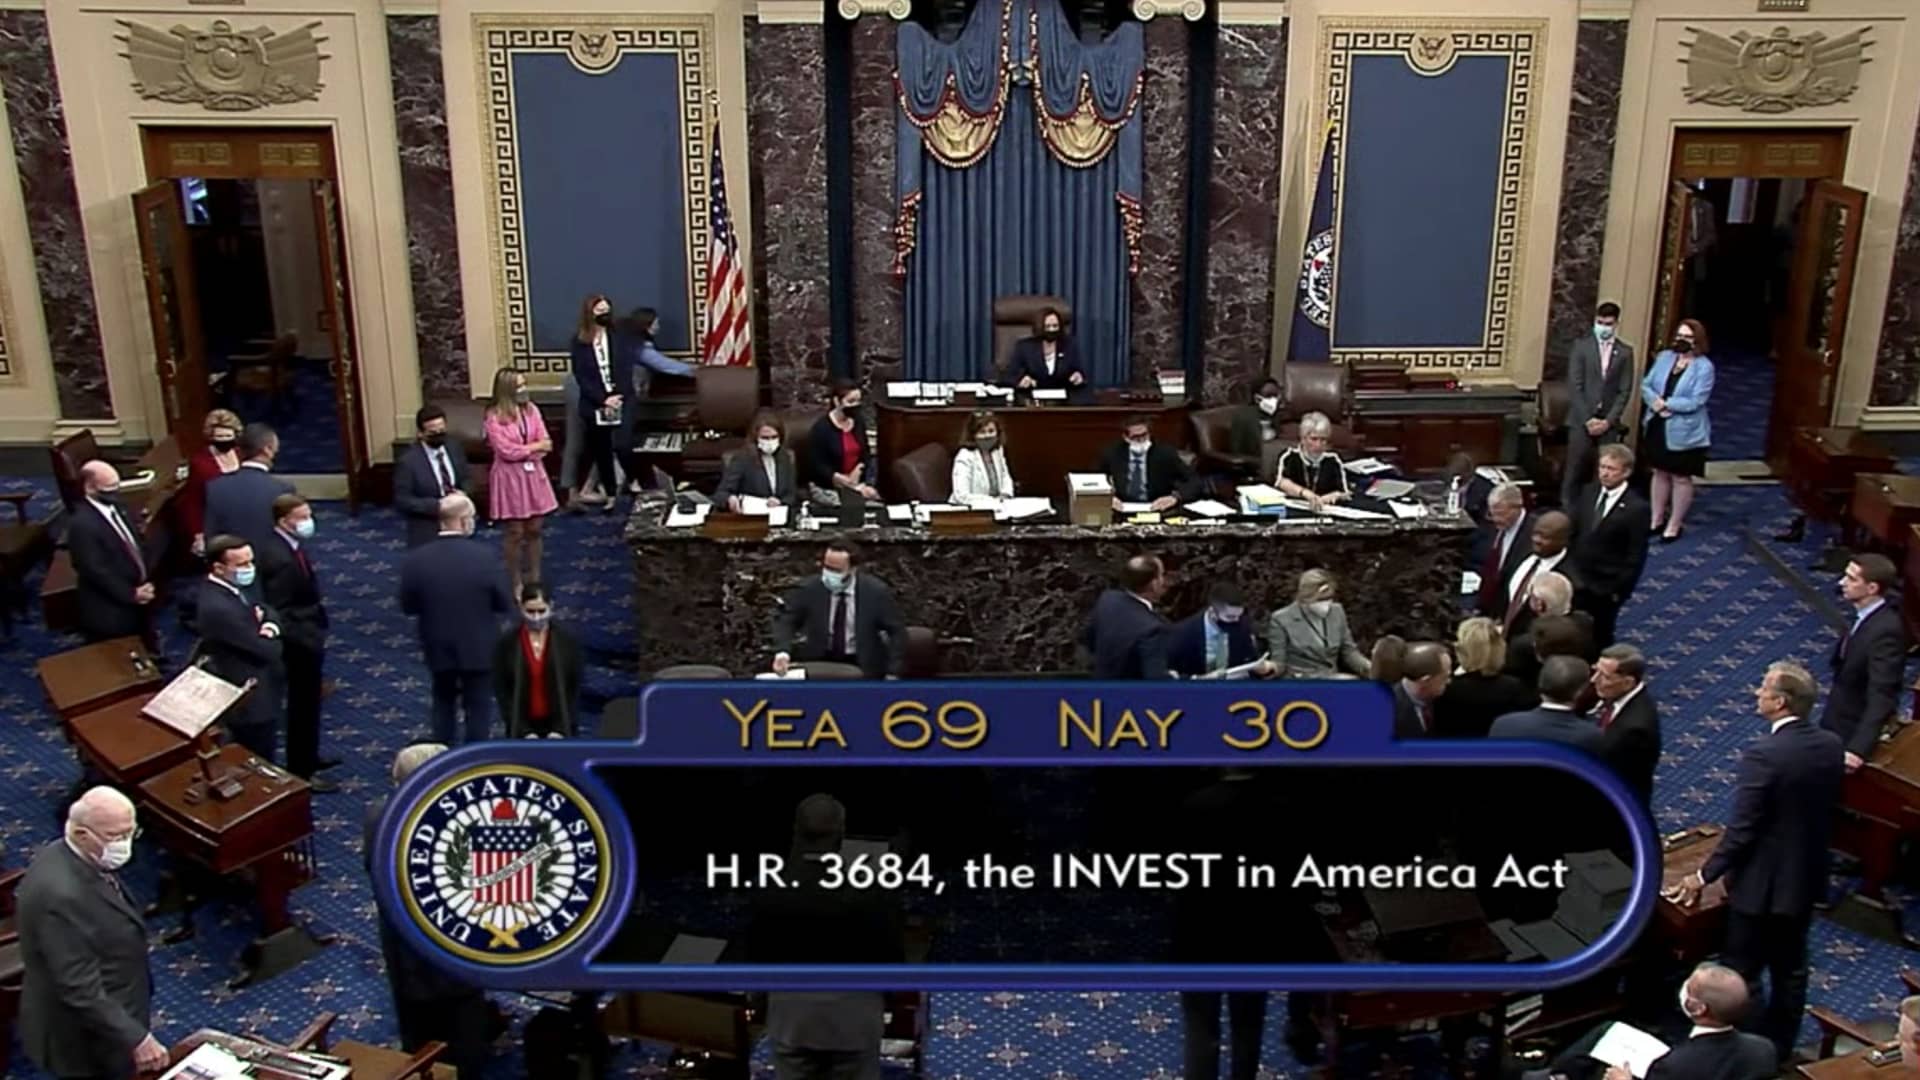 U.S. Vice President Kamala Harris presides over the U.S. Senate and announces the vote totals of 69 Yeas and 30 Nays as the Senate passes a $1 trillion bipartisan infrastructure bill, as seen in a frame grab from video shot in the U.S. Senate chamber on Capitol Hill in Washington, U.S., August 10, 2021.